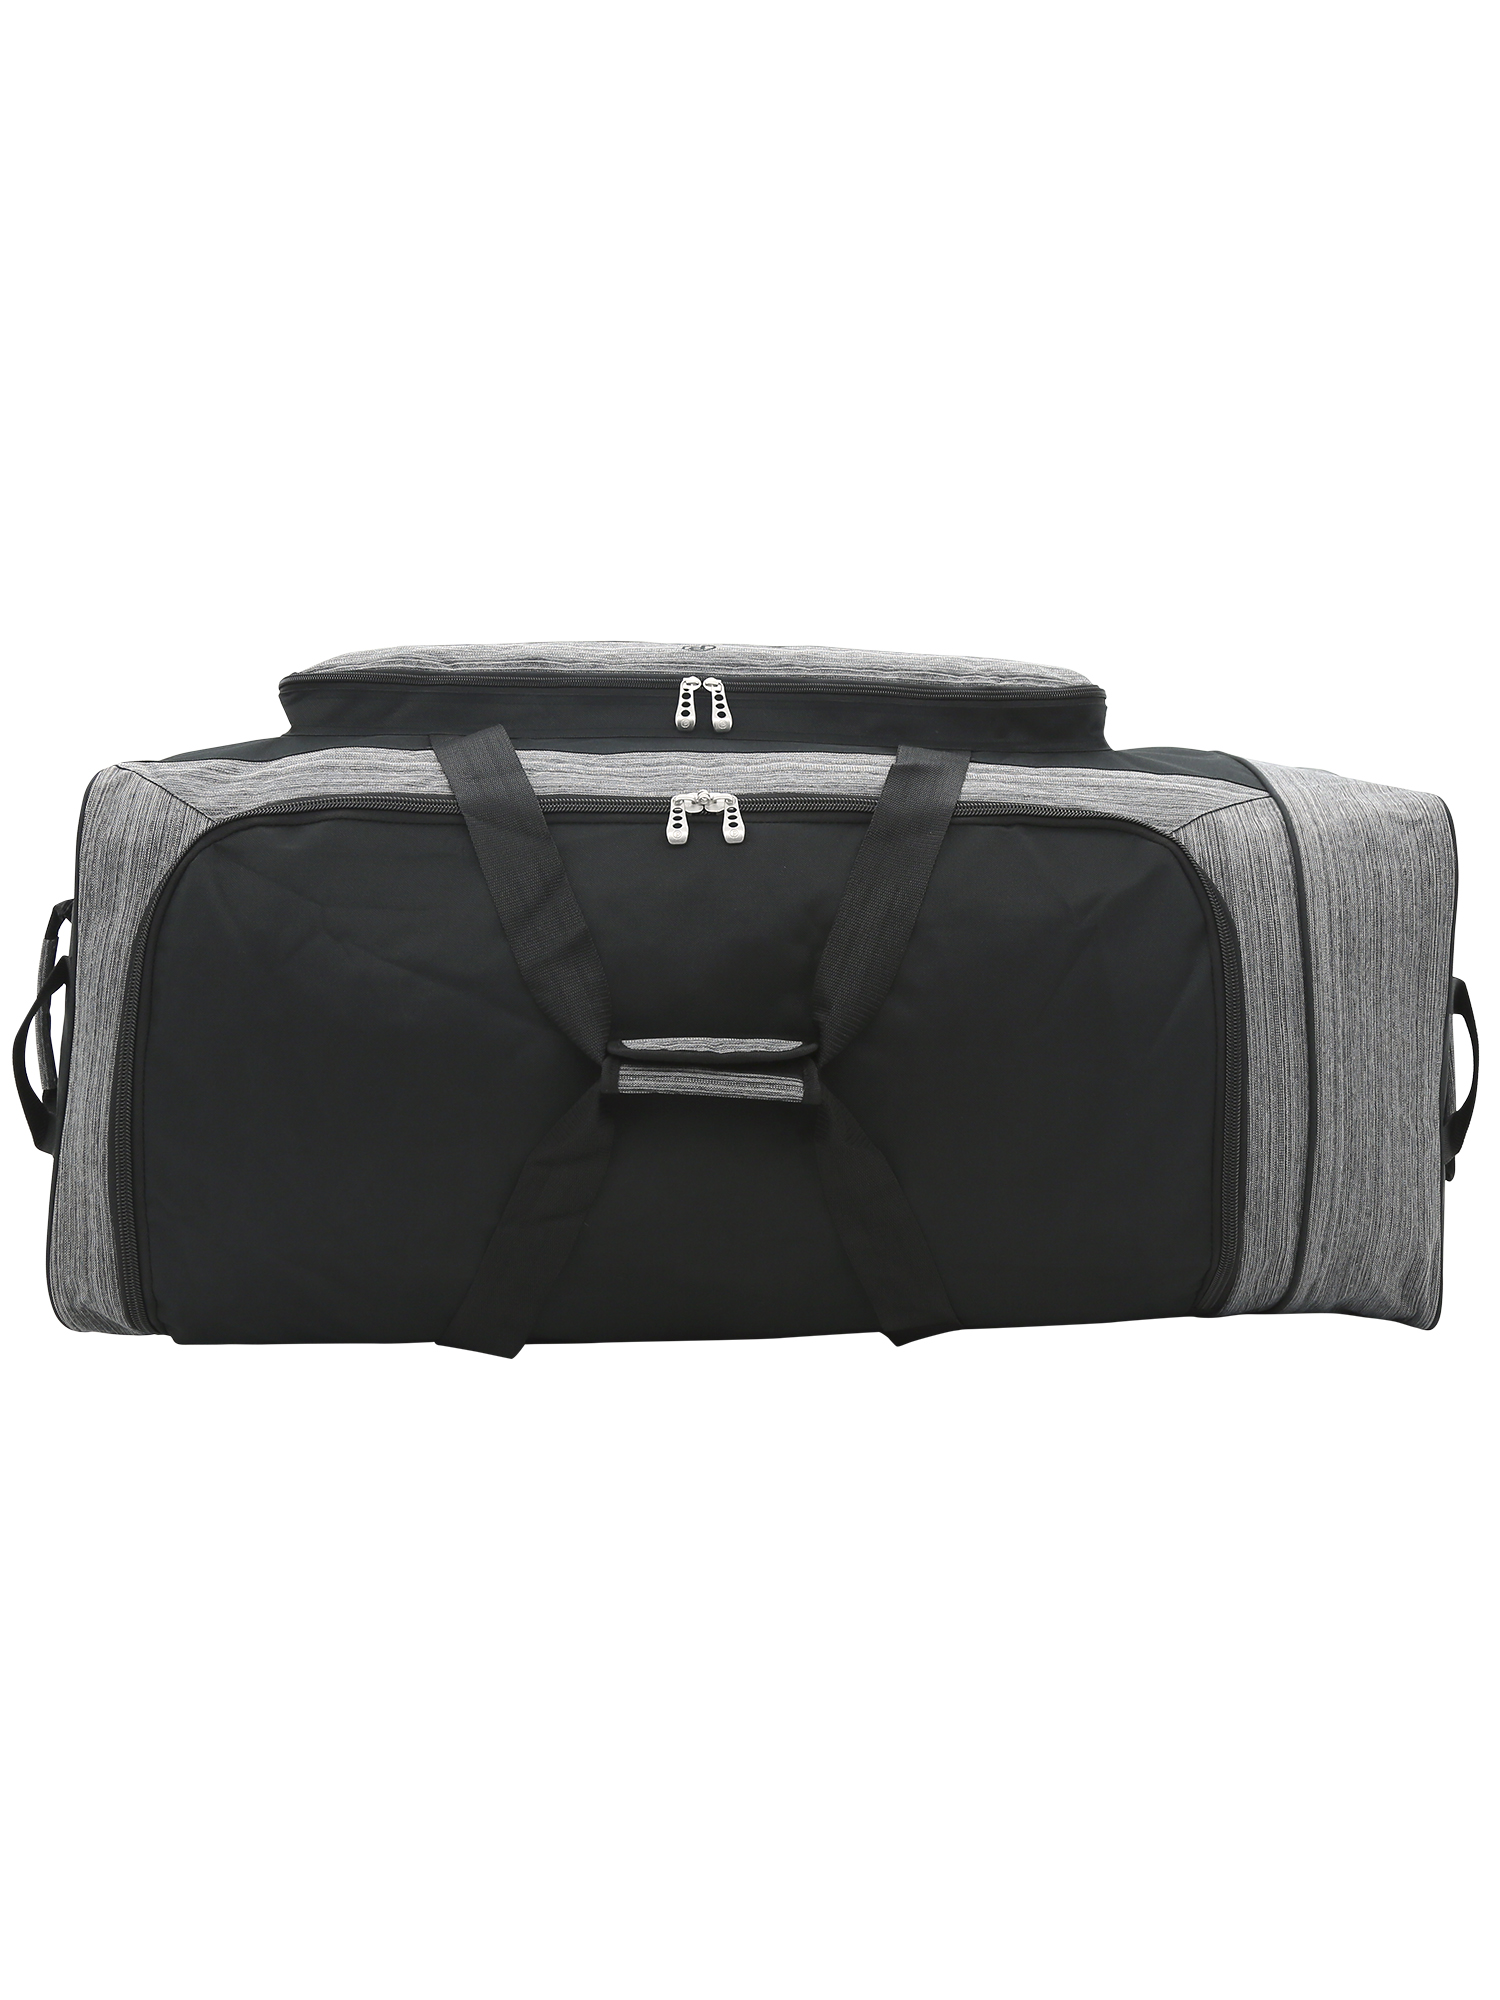 Protege 36" Tri-Fold Polyester Rolling Trunk Duffel for Travel (Walmart Exclusive) - image 5 of 8